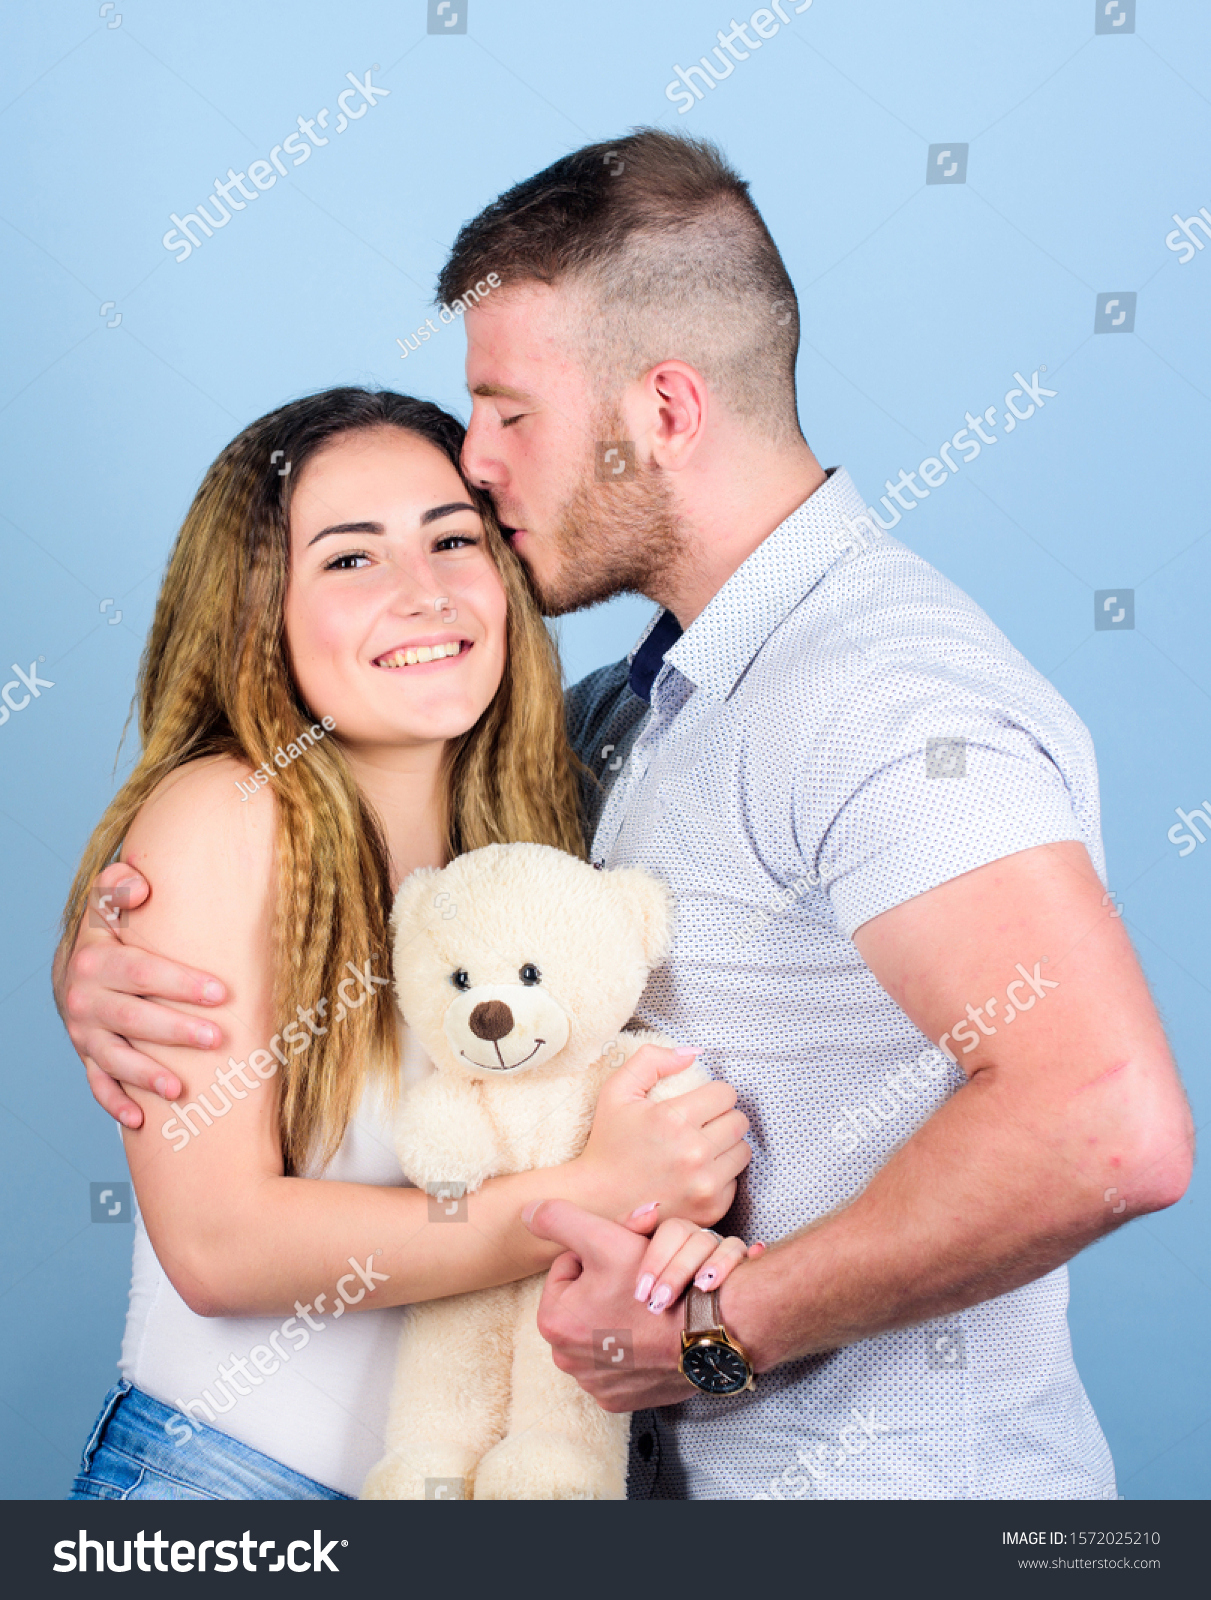 Valentines day holiday. Soft toy teddy bear gift. Man and woman couple in love. Romantic surprise. Man and pretty girl in love. Family love. Guy and girl cuddling. Enjoying each other. Happy family. #1572025210